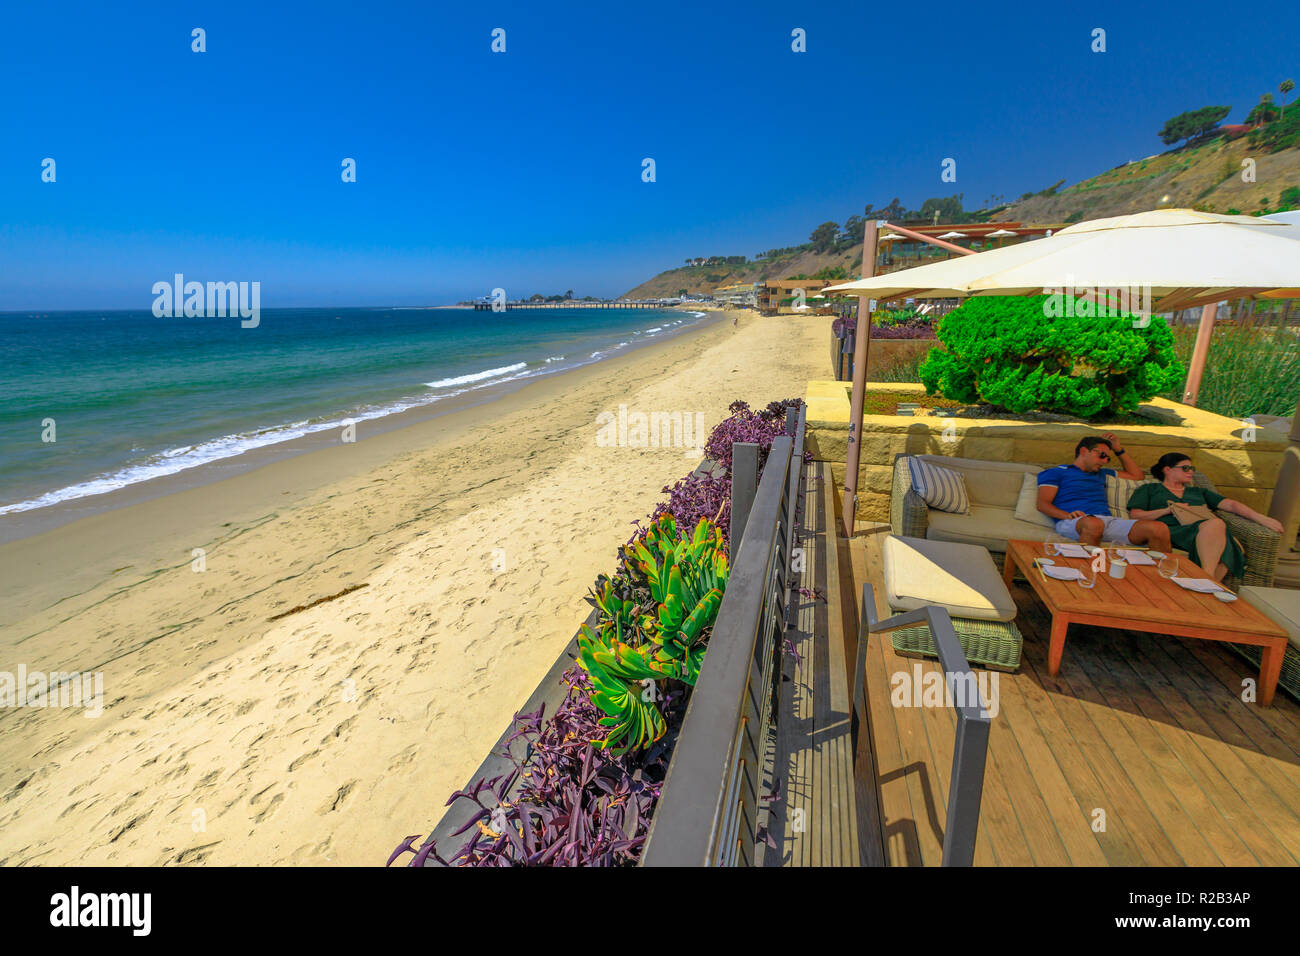 Malibu, California, United States - August 7, 2018: couple sitting at luxurious Japanese restaurant Nobu on famous Billionaire Beach or Carbon Beach for many famous people in Malibu. Summer holidays. Stock Photo